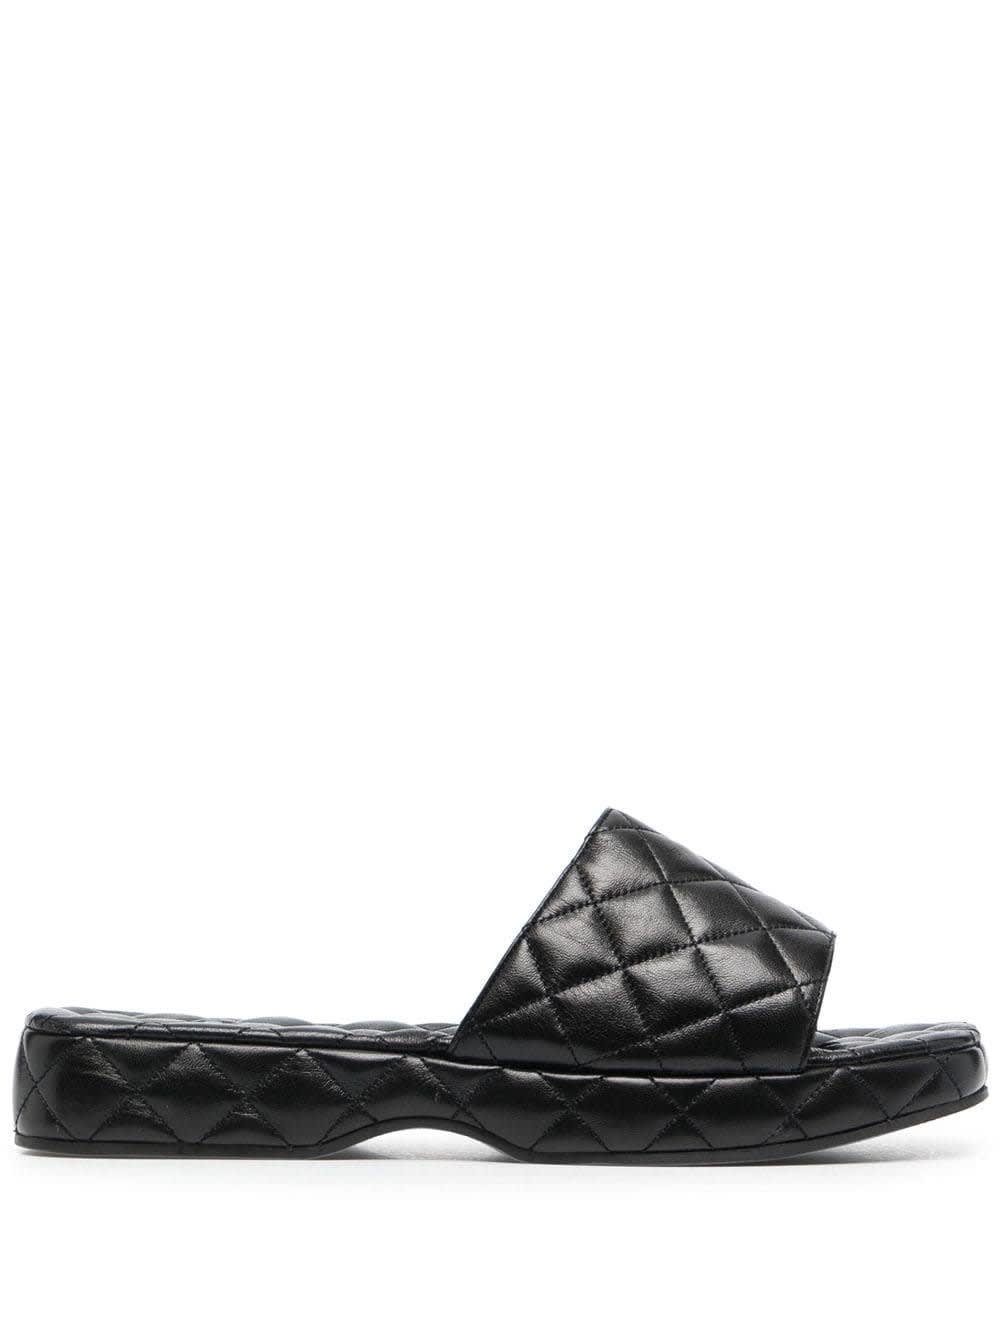 BY FAR QUILTED LEATHER BLACK LILO MULES,11797703